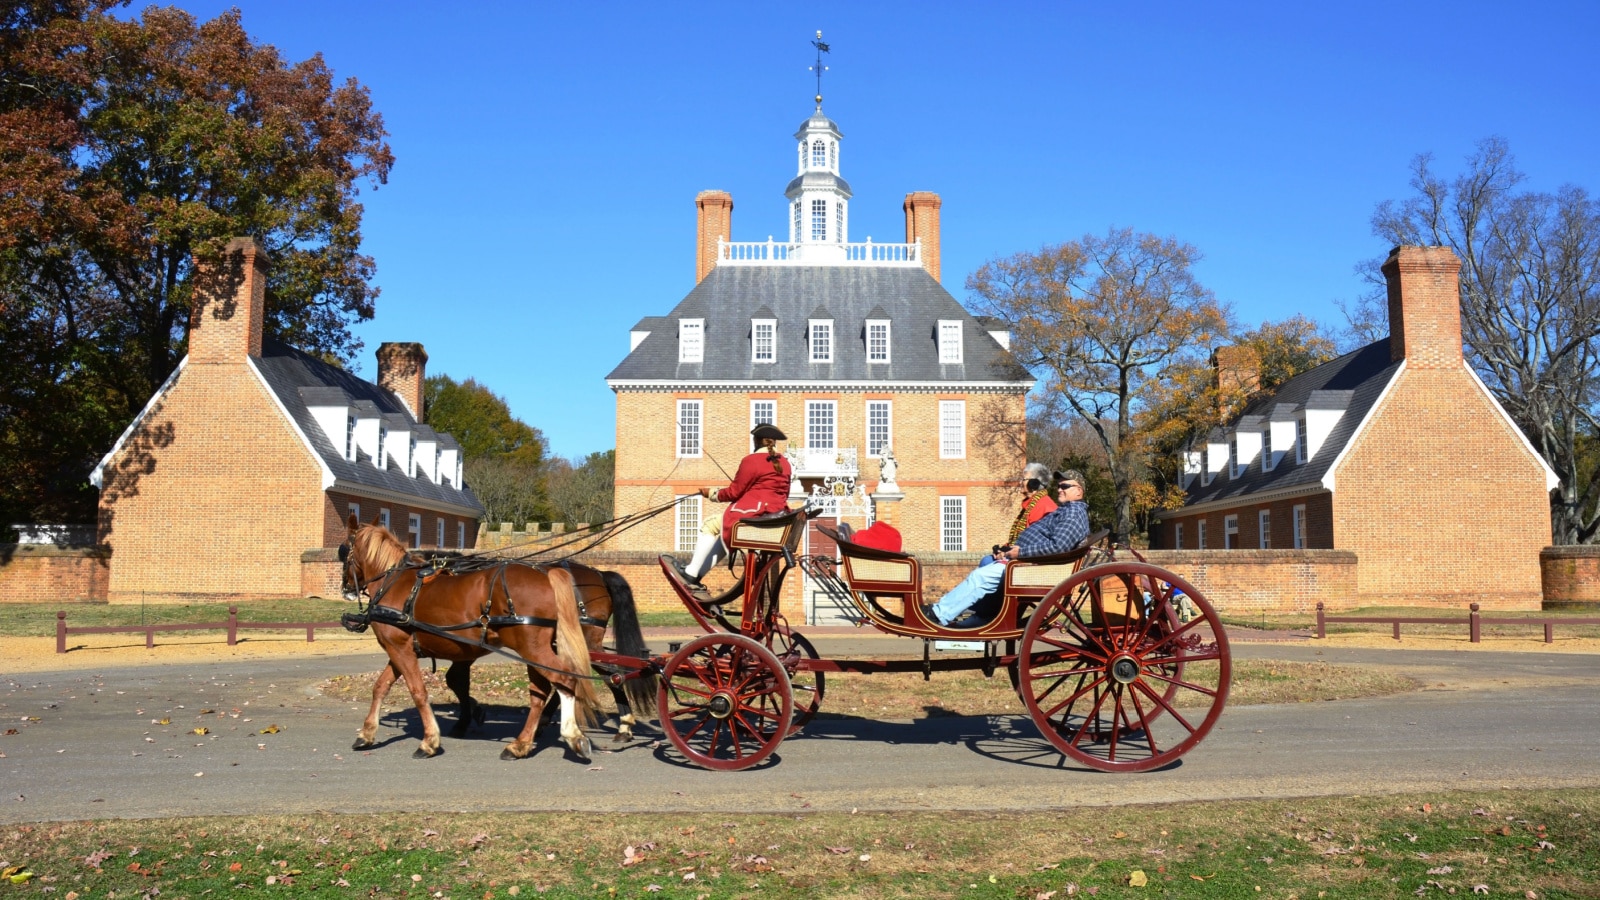 WILLIAMSBURG, VIRGINIA - NOVEMBER 19 2014: The Governors Palace in Colonial Williamsburg, Virginia. It was reconstructed on the original site after a fire destroyed it in the 1930's.